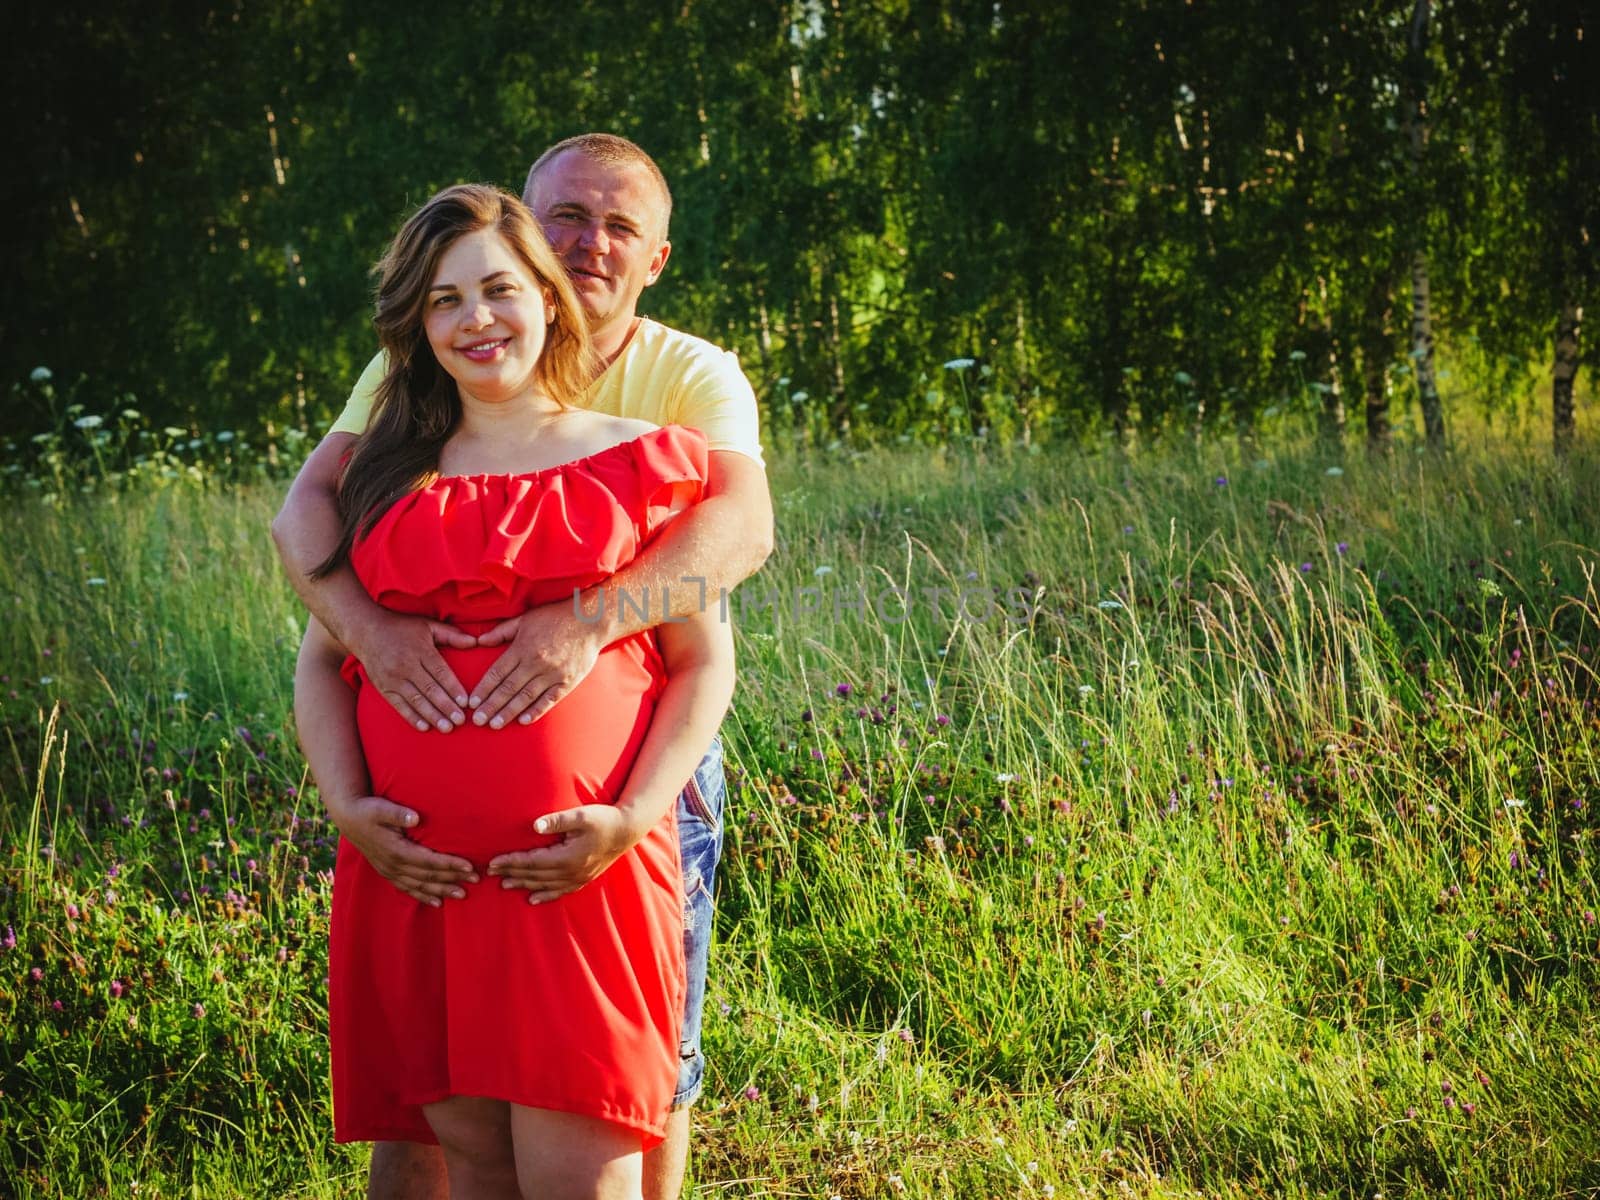 Pregnant woman and her husband with hands on belly outdoors by fascinadora